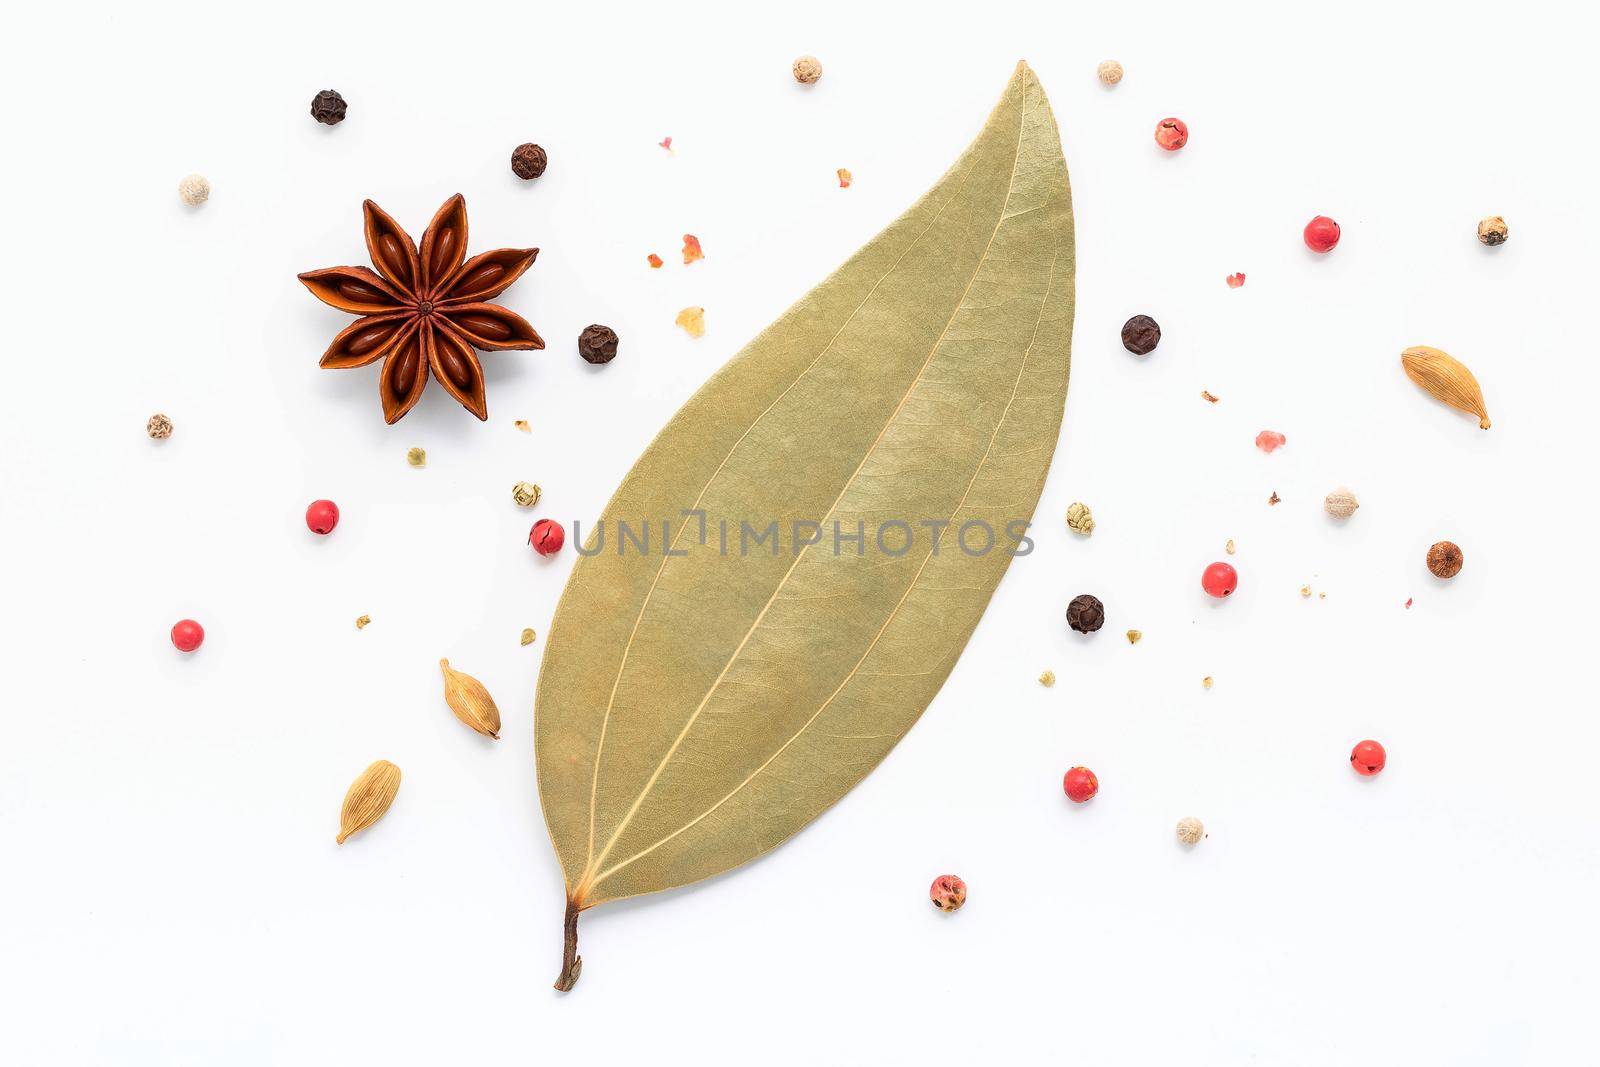 Cinnamon sticks, star anise and spices isolated on white background.